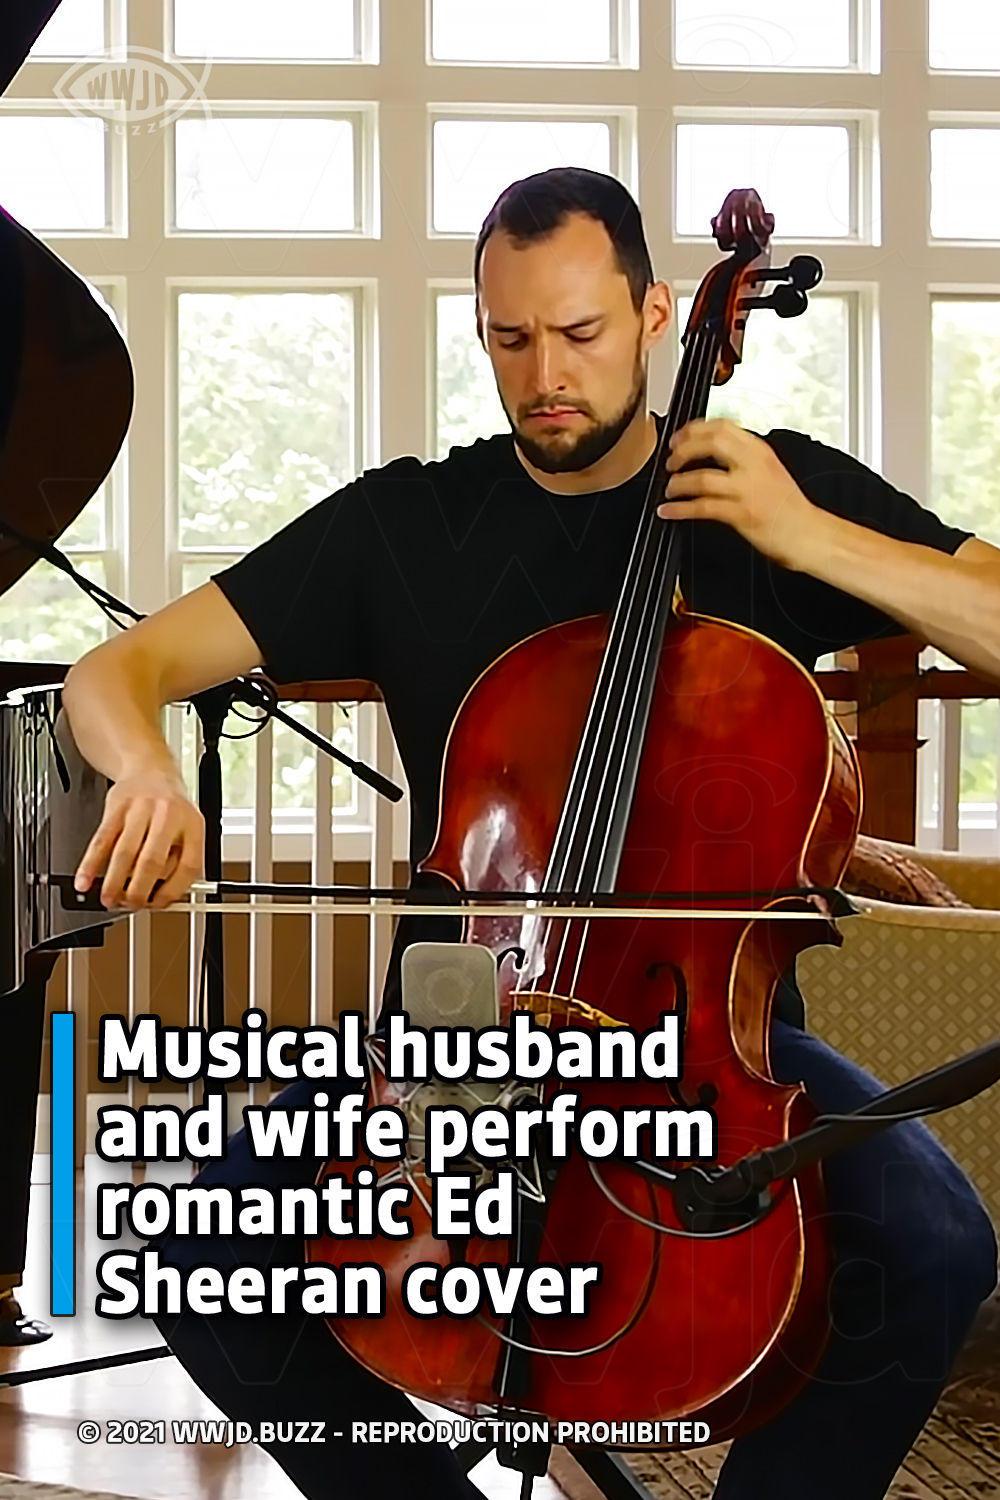 Musical husband and wife perform romantic Ed Sheeran cover